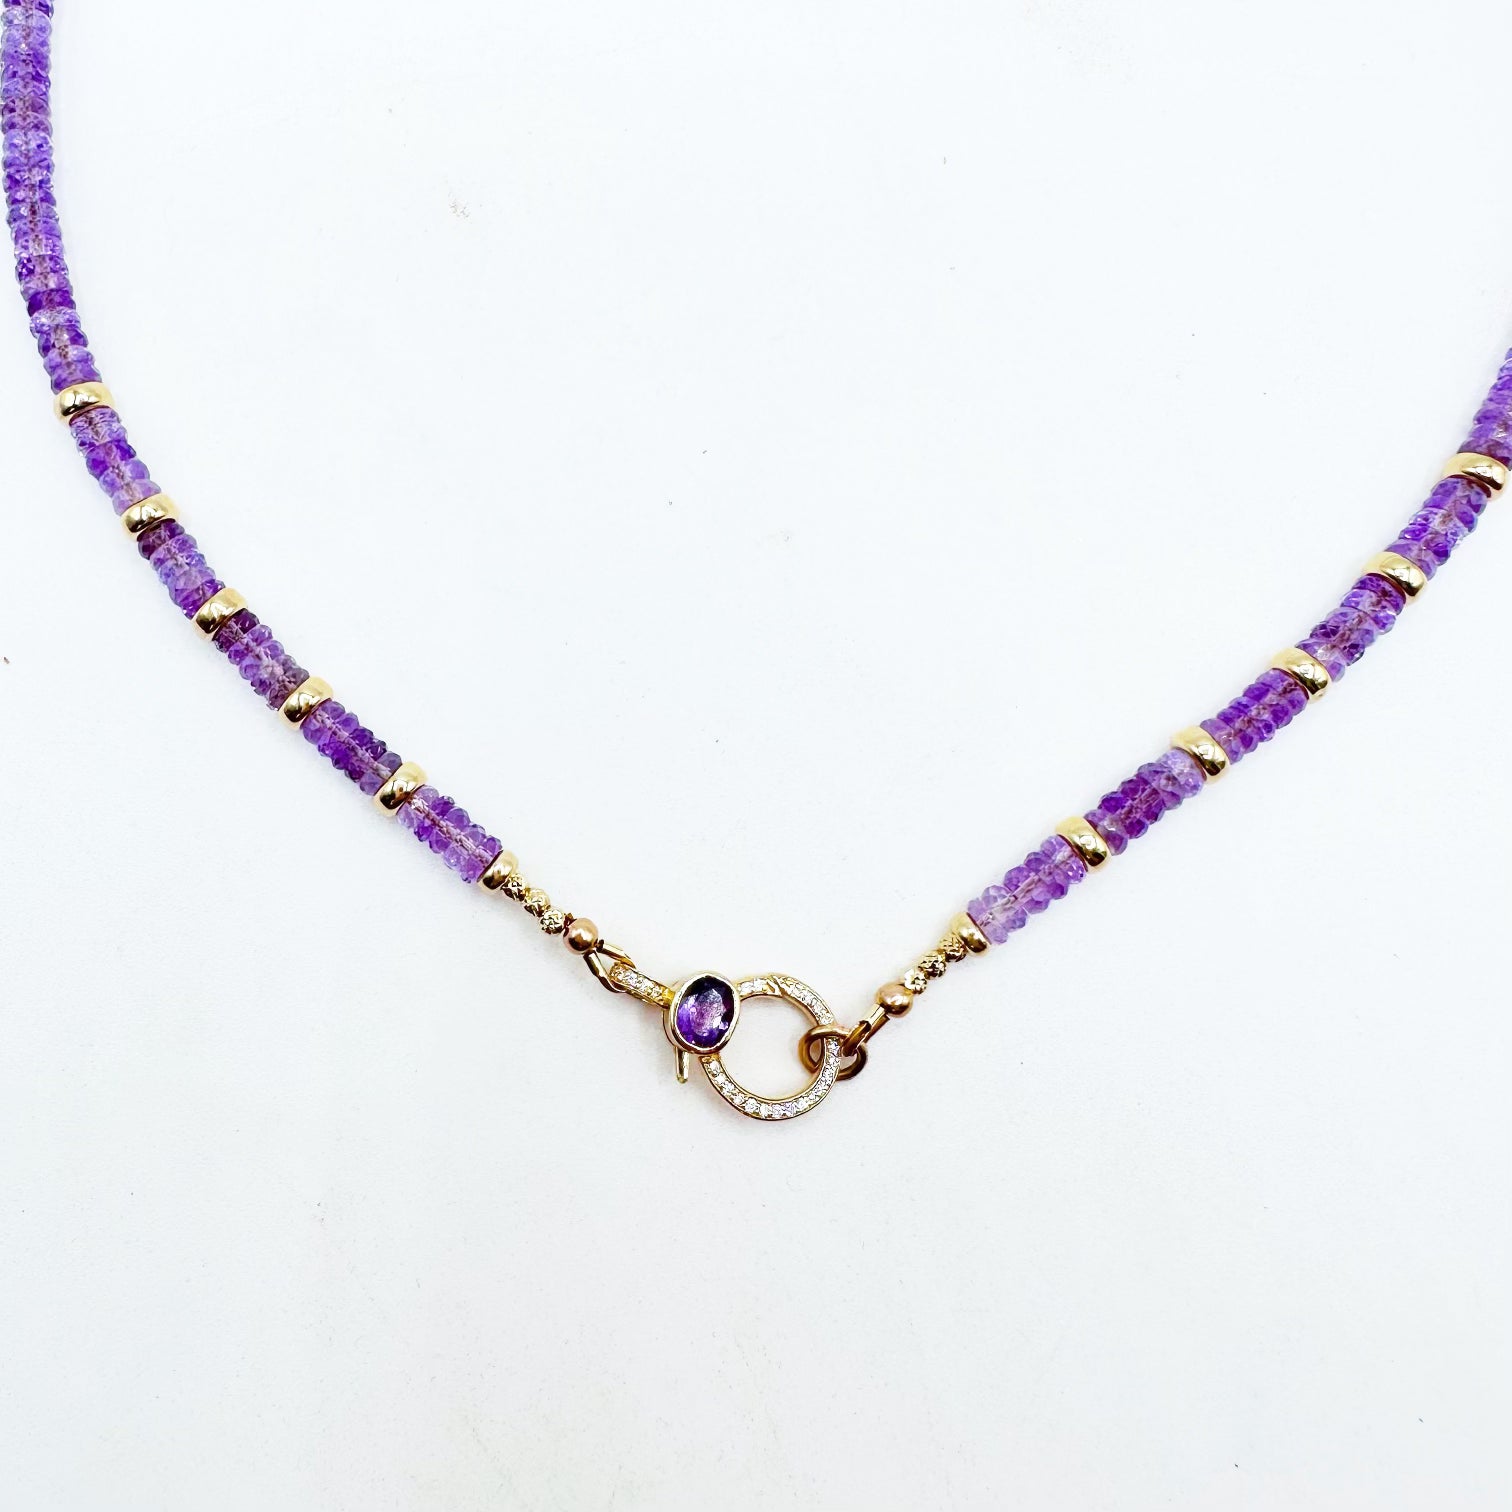 AMETHYST NECKLACE WITH 14K GOLD AND DIAMOND CLASP